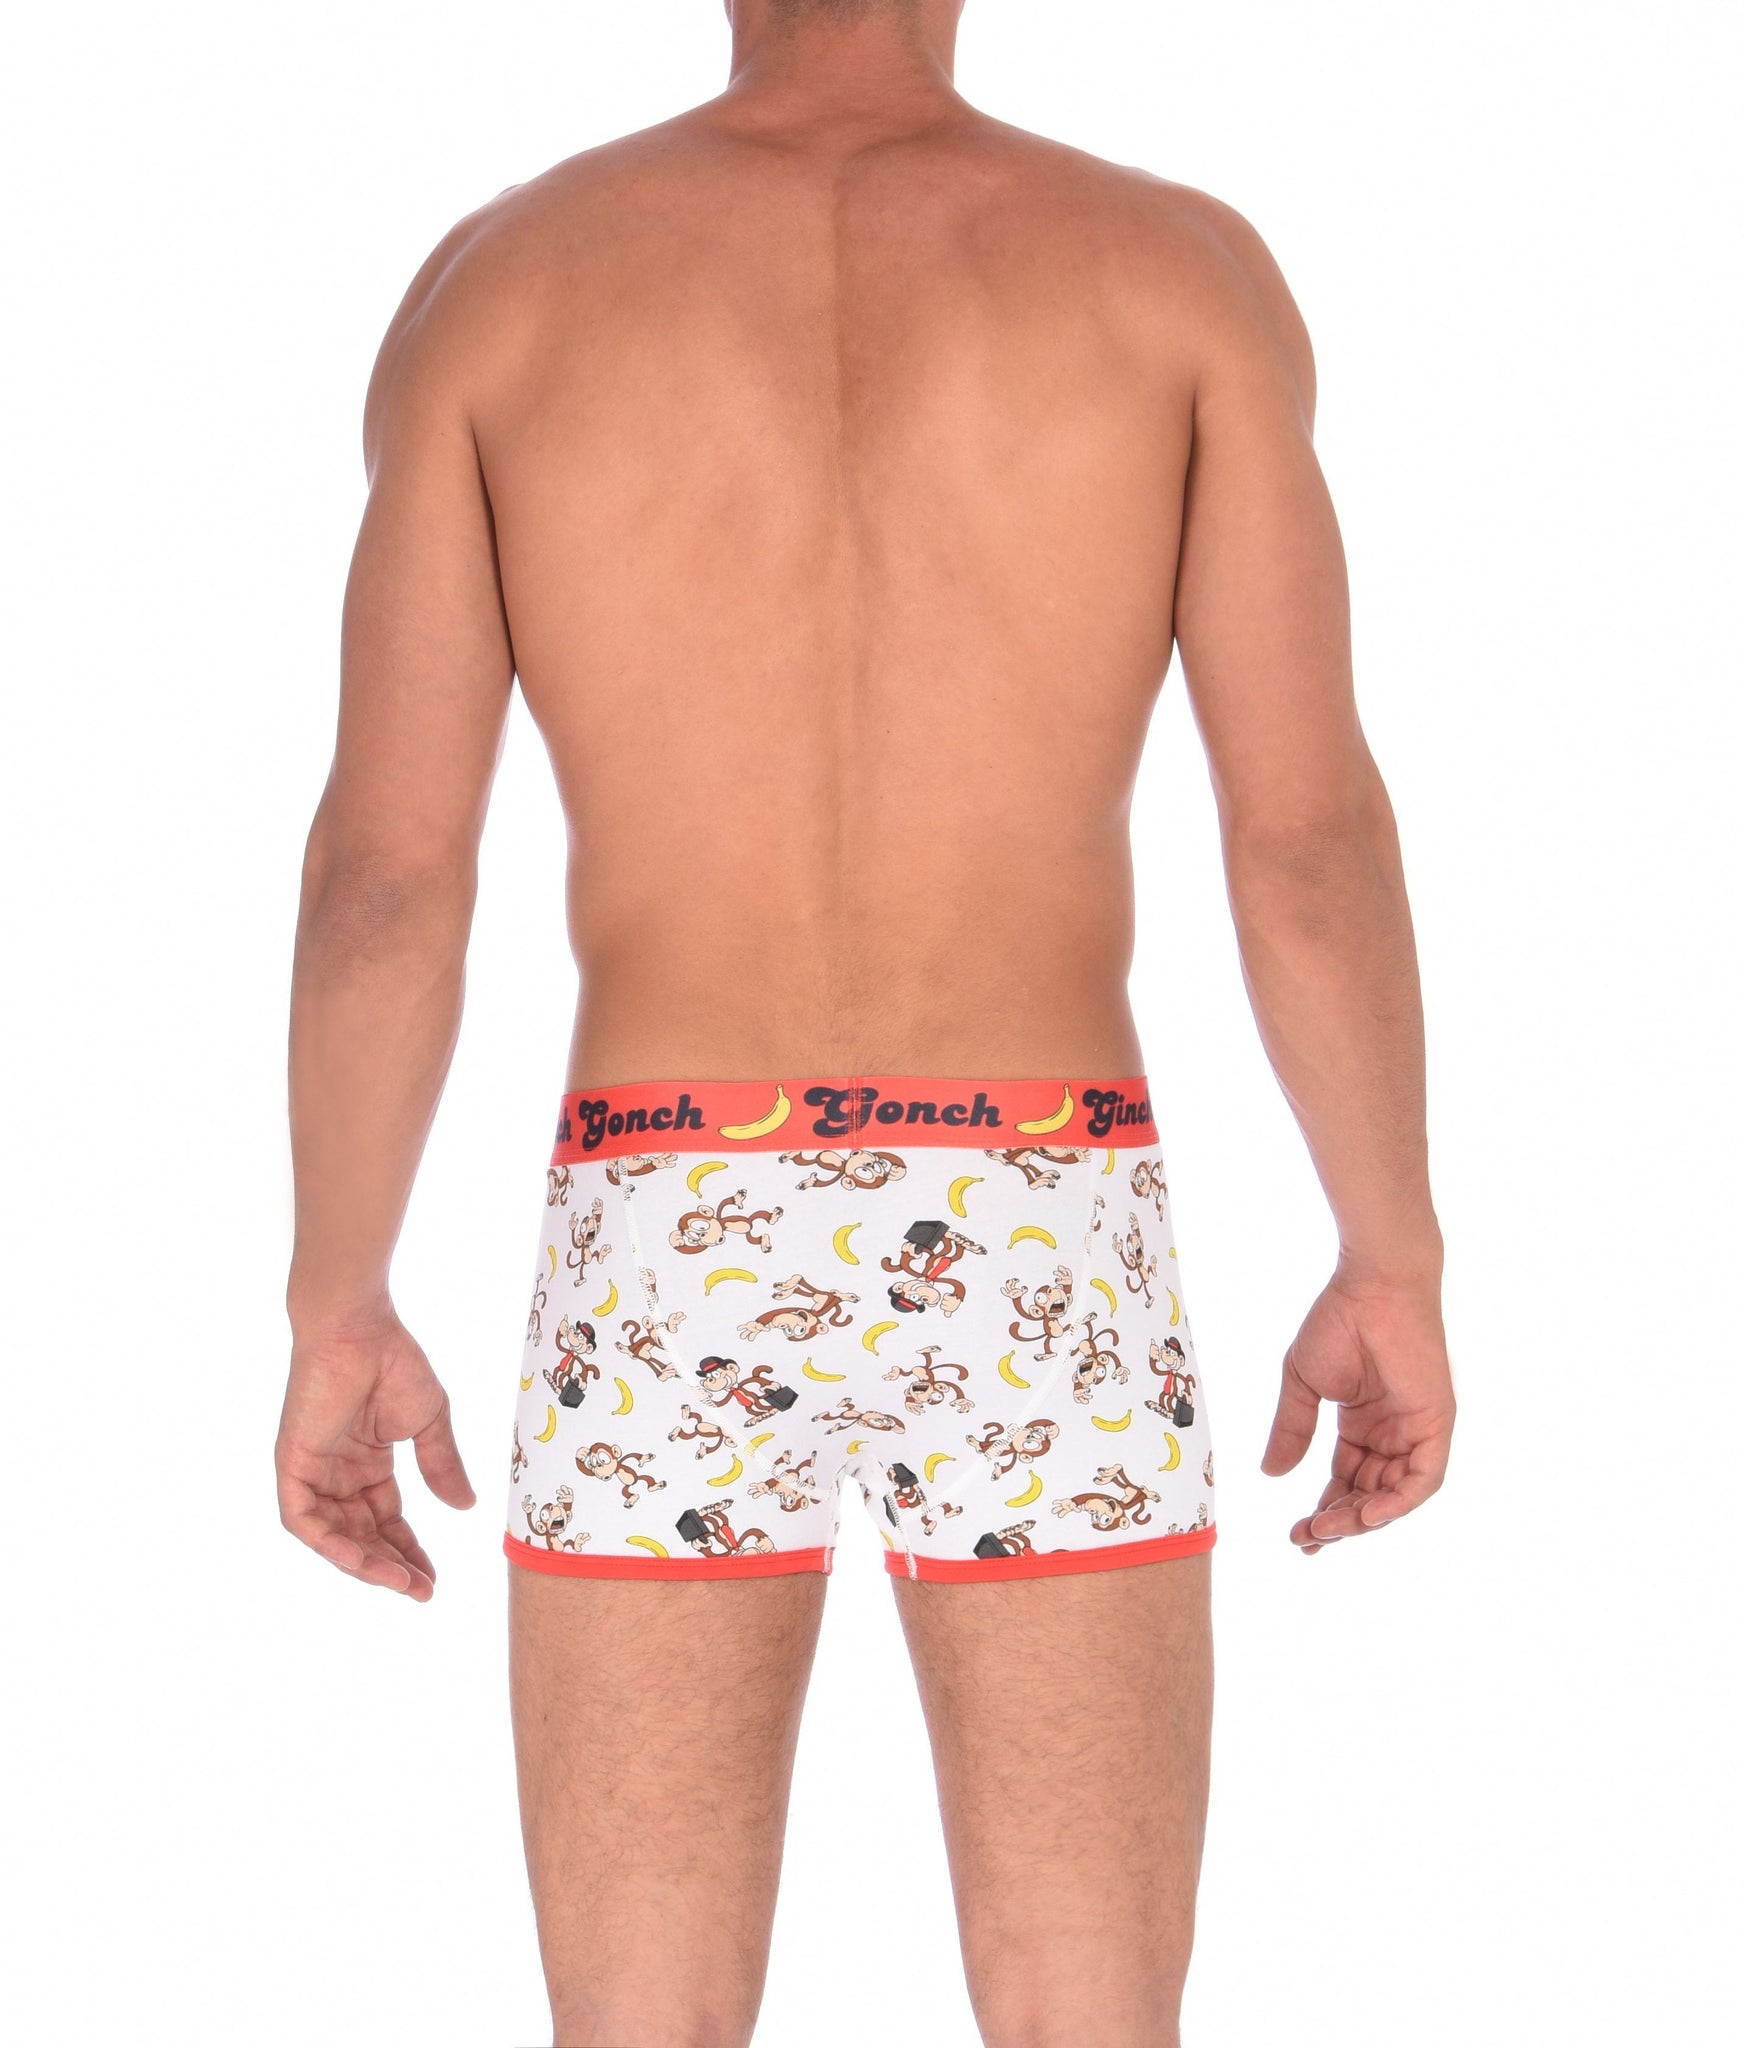 GG Ginch Gonch Gone Bananas Boxer Brief men's underwear trunk white fabric with monkeys and bananas red trim and red printed waistband back